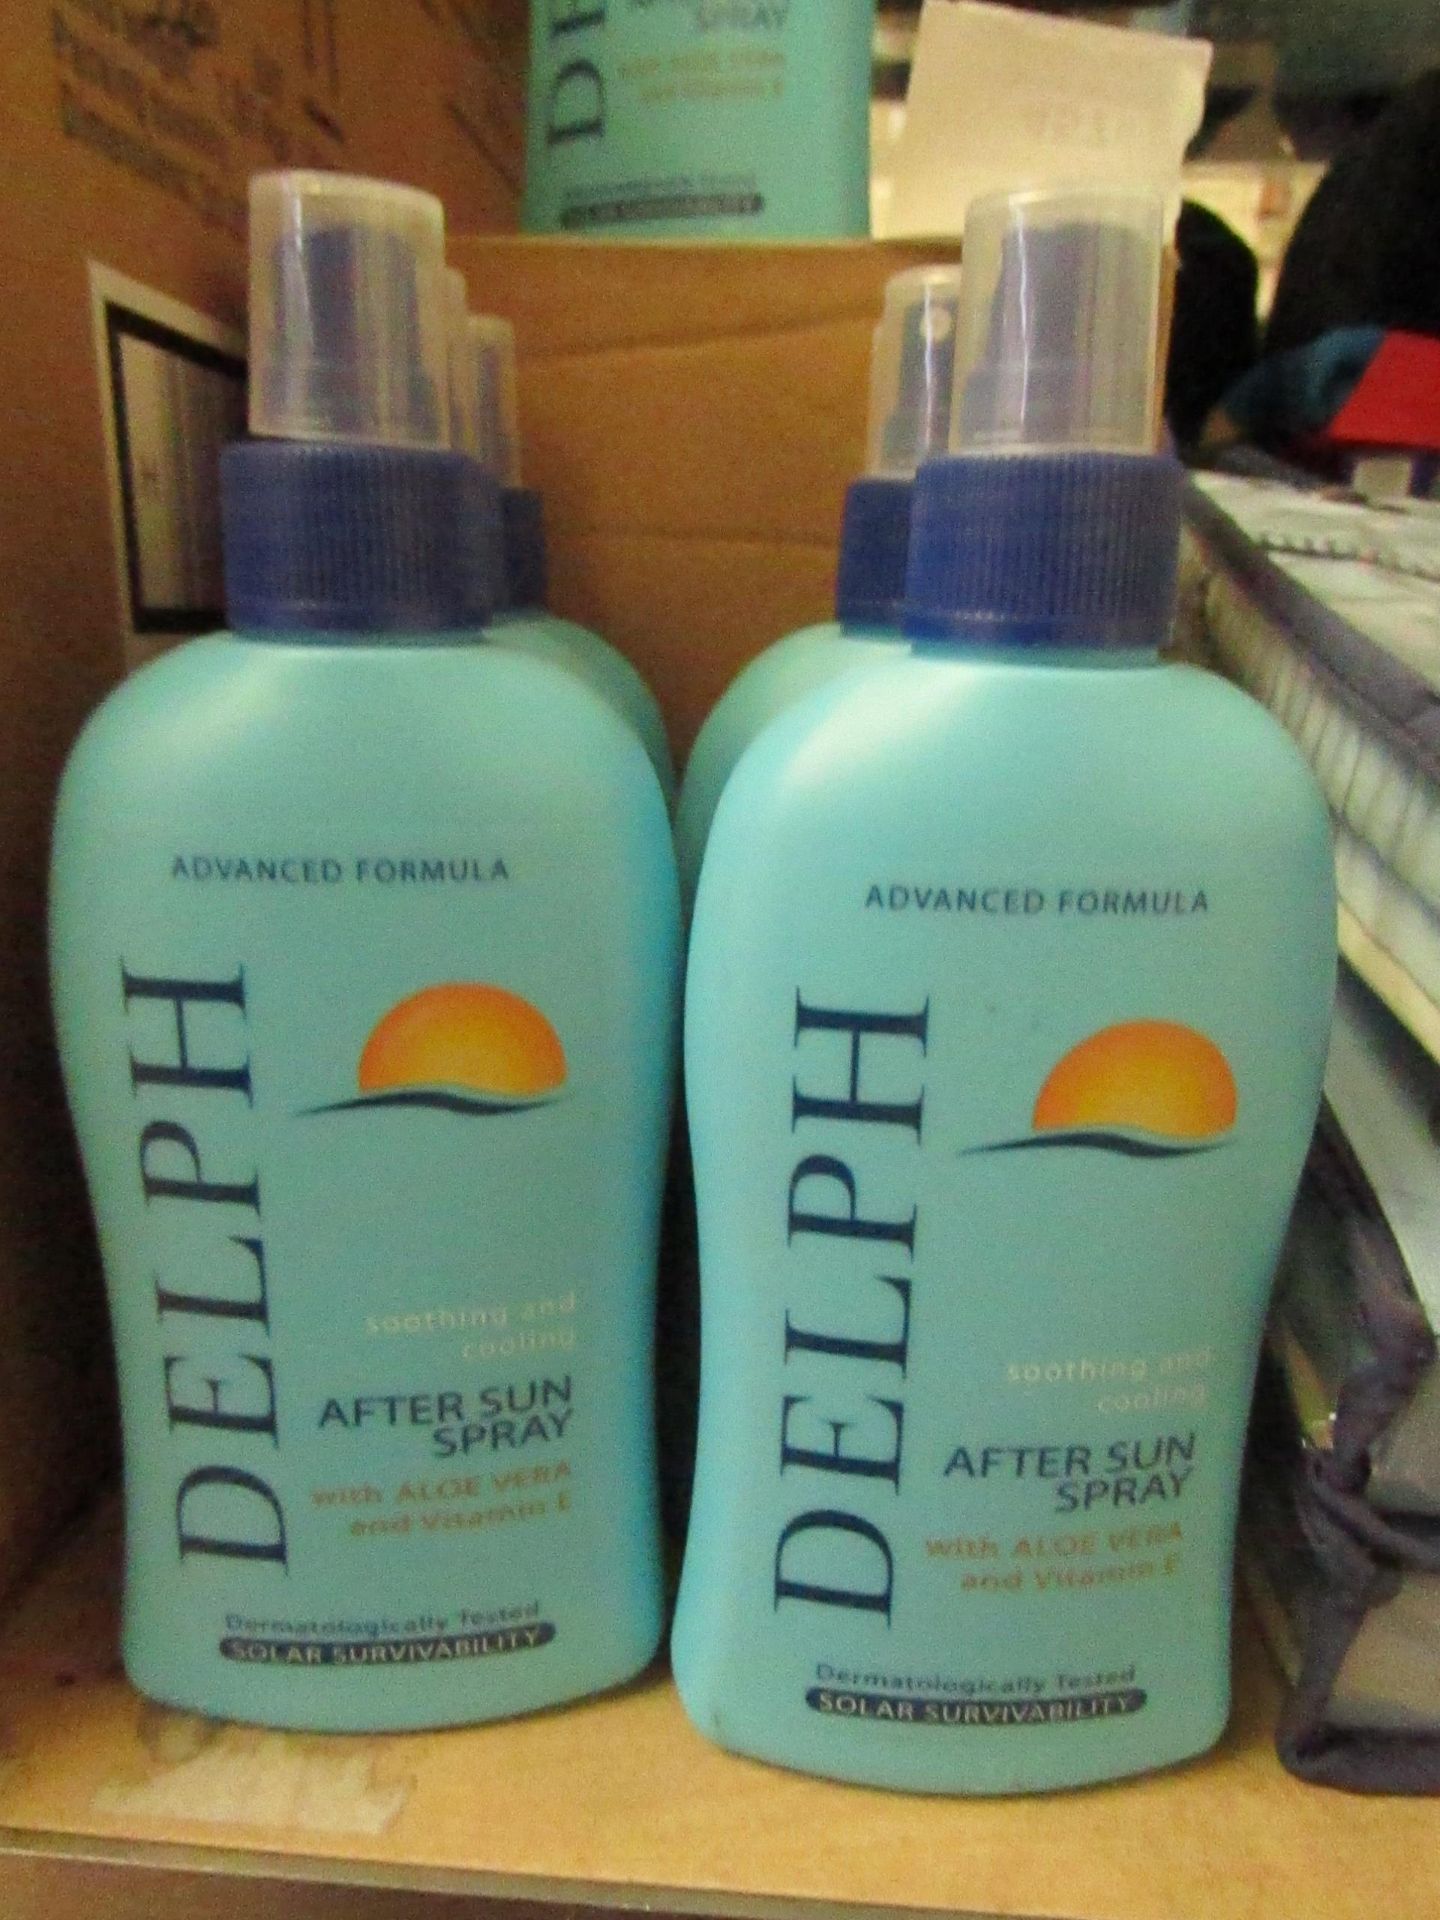 12x Delph - After Sun Spray, With Aloe Vera - All New and Boxed.